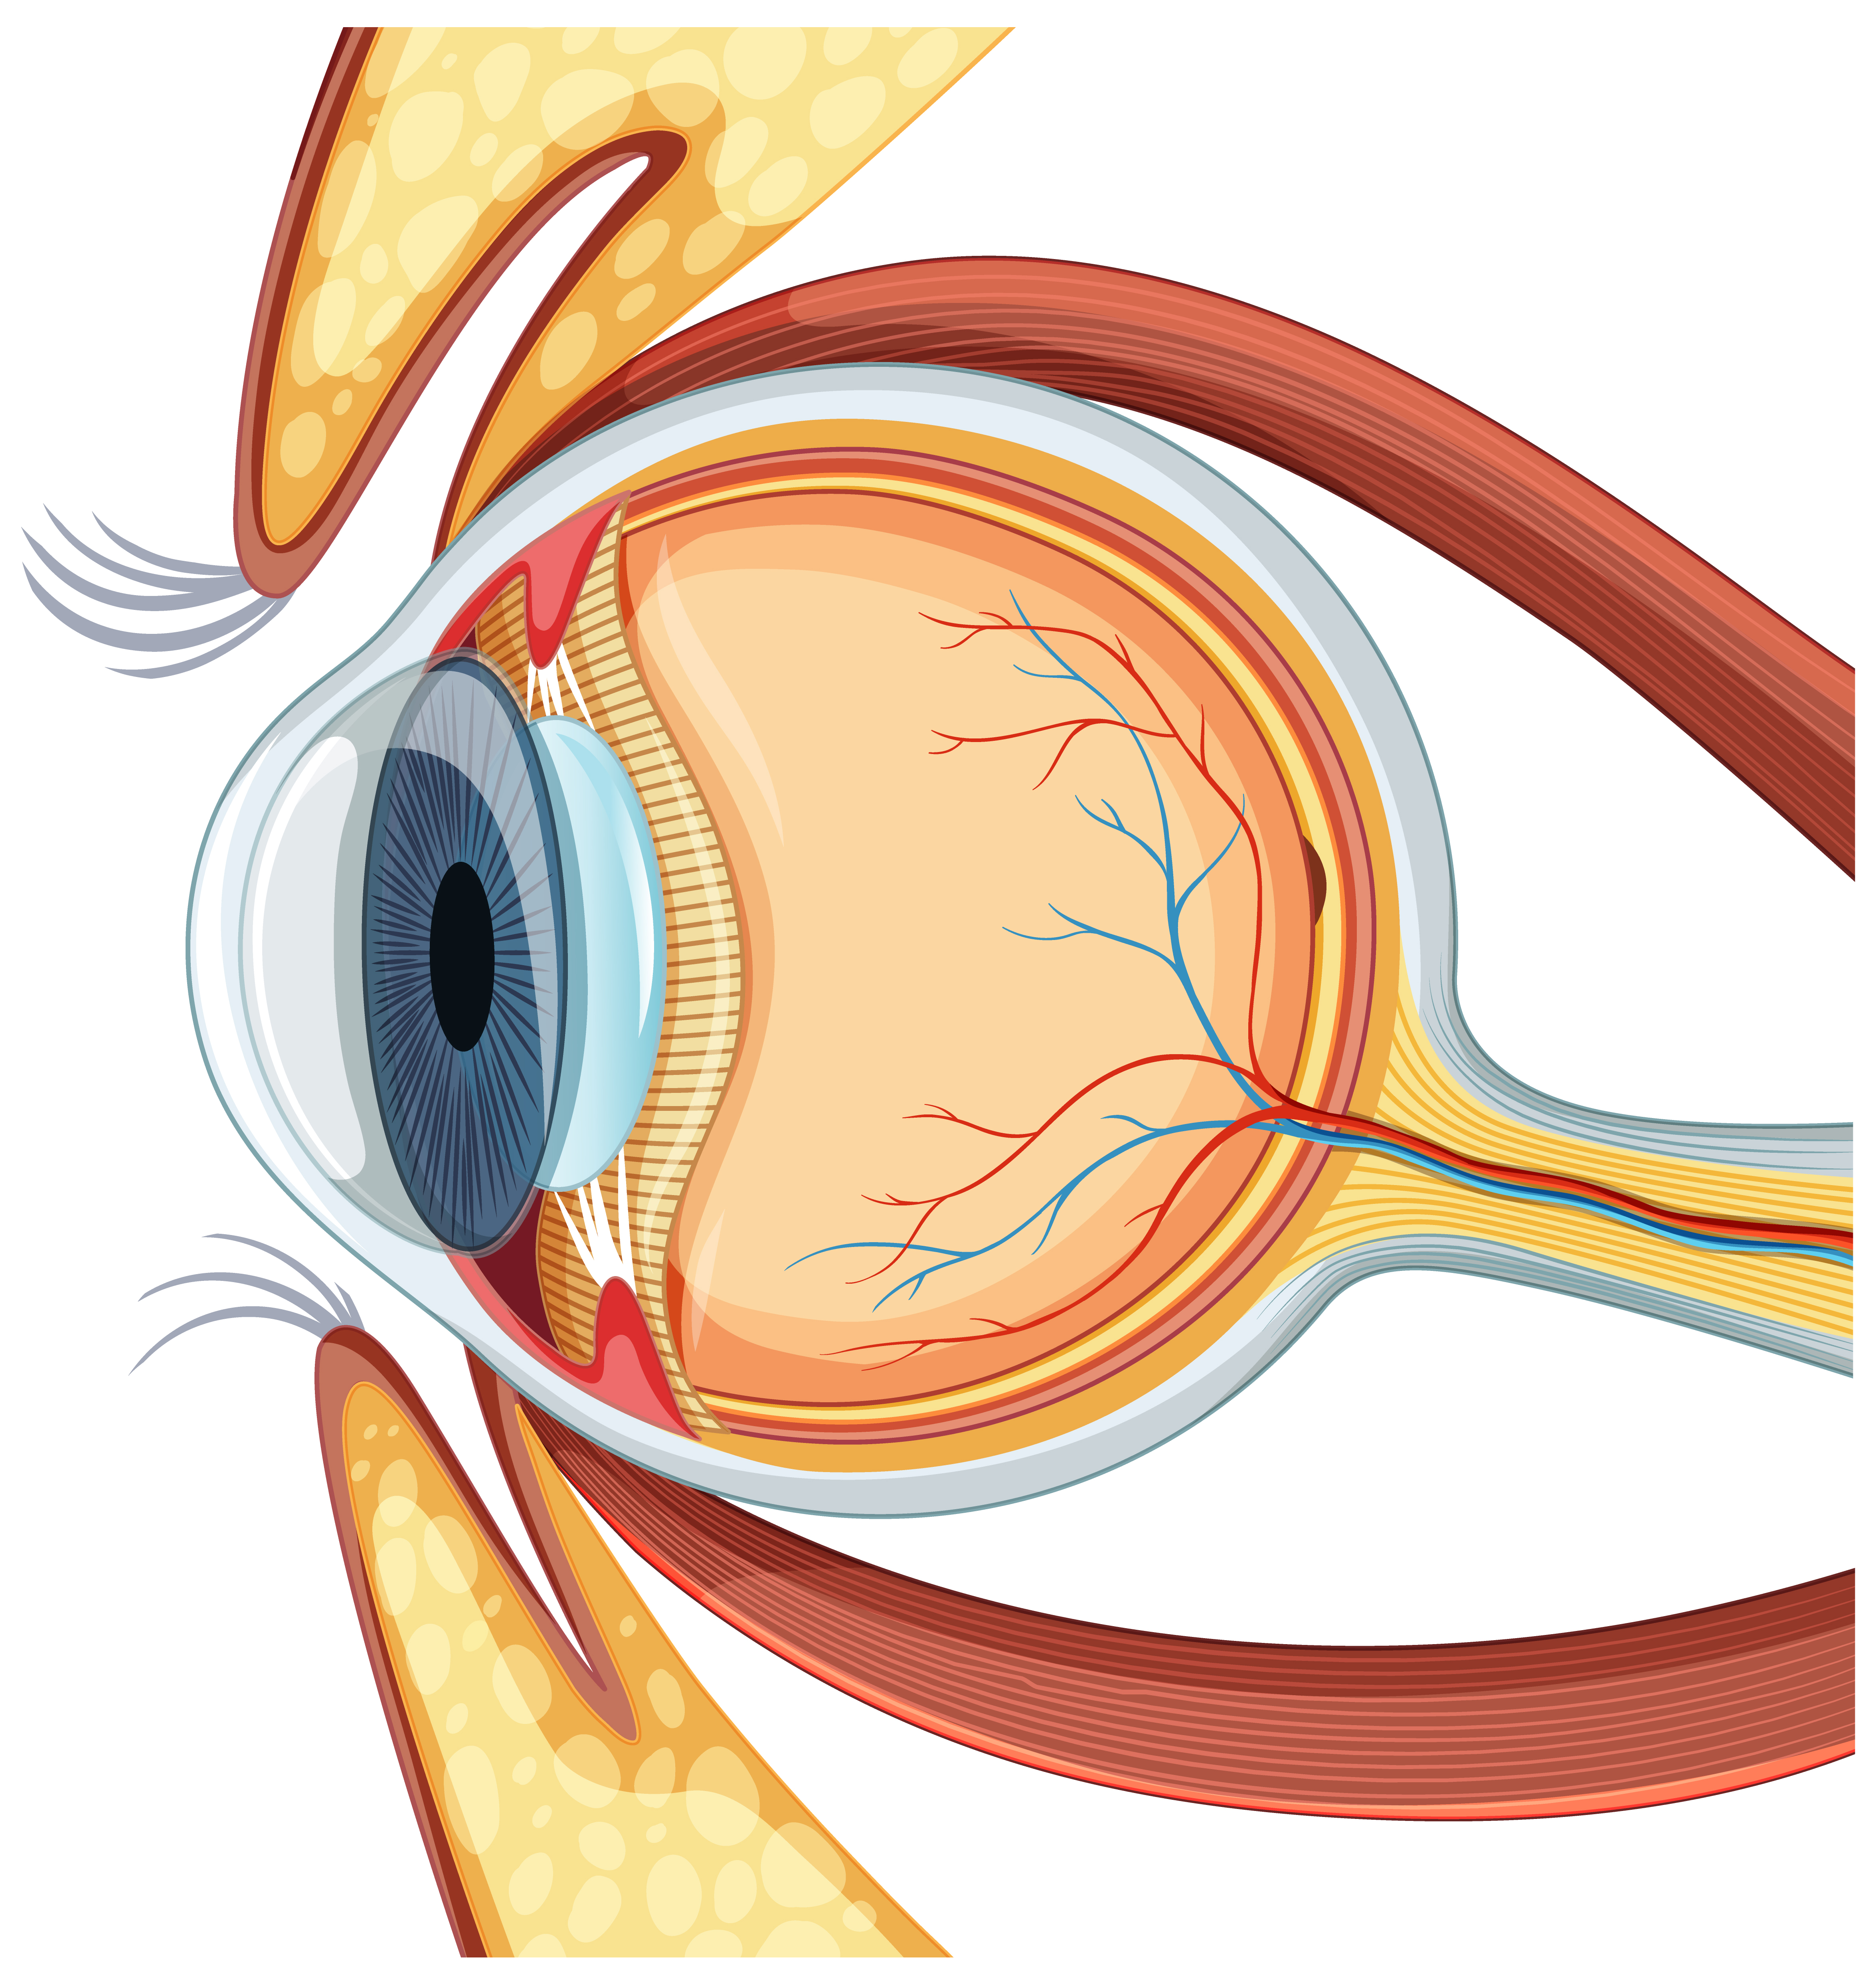 Intravitreal Injection of Etamsylate Improves Visual Acuity in Patients with Dry Age-Related Macular Degeneration. Results from the International, Multicentric, Blind, Randomized, and Sham-Controlled Jericho-D Study